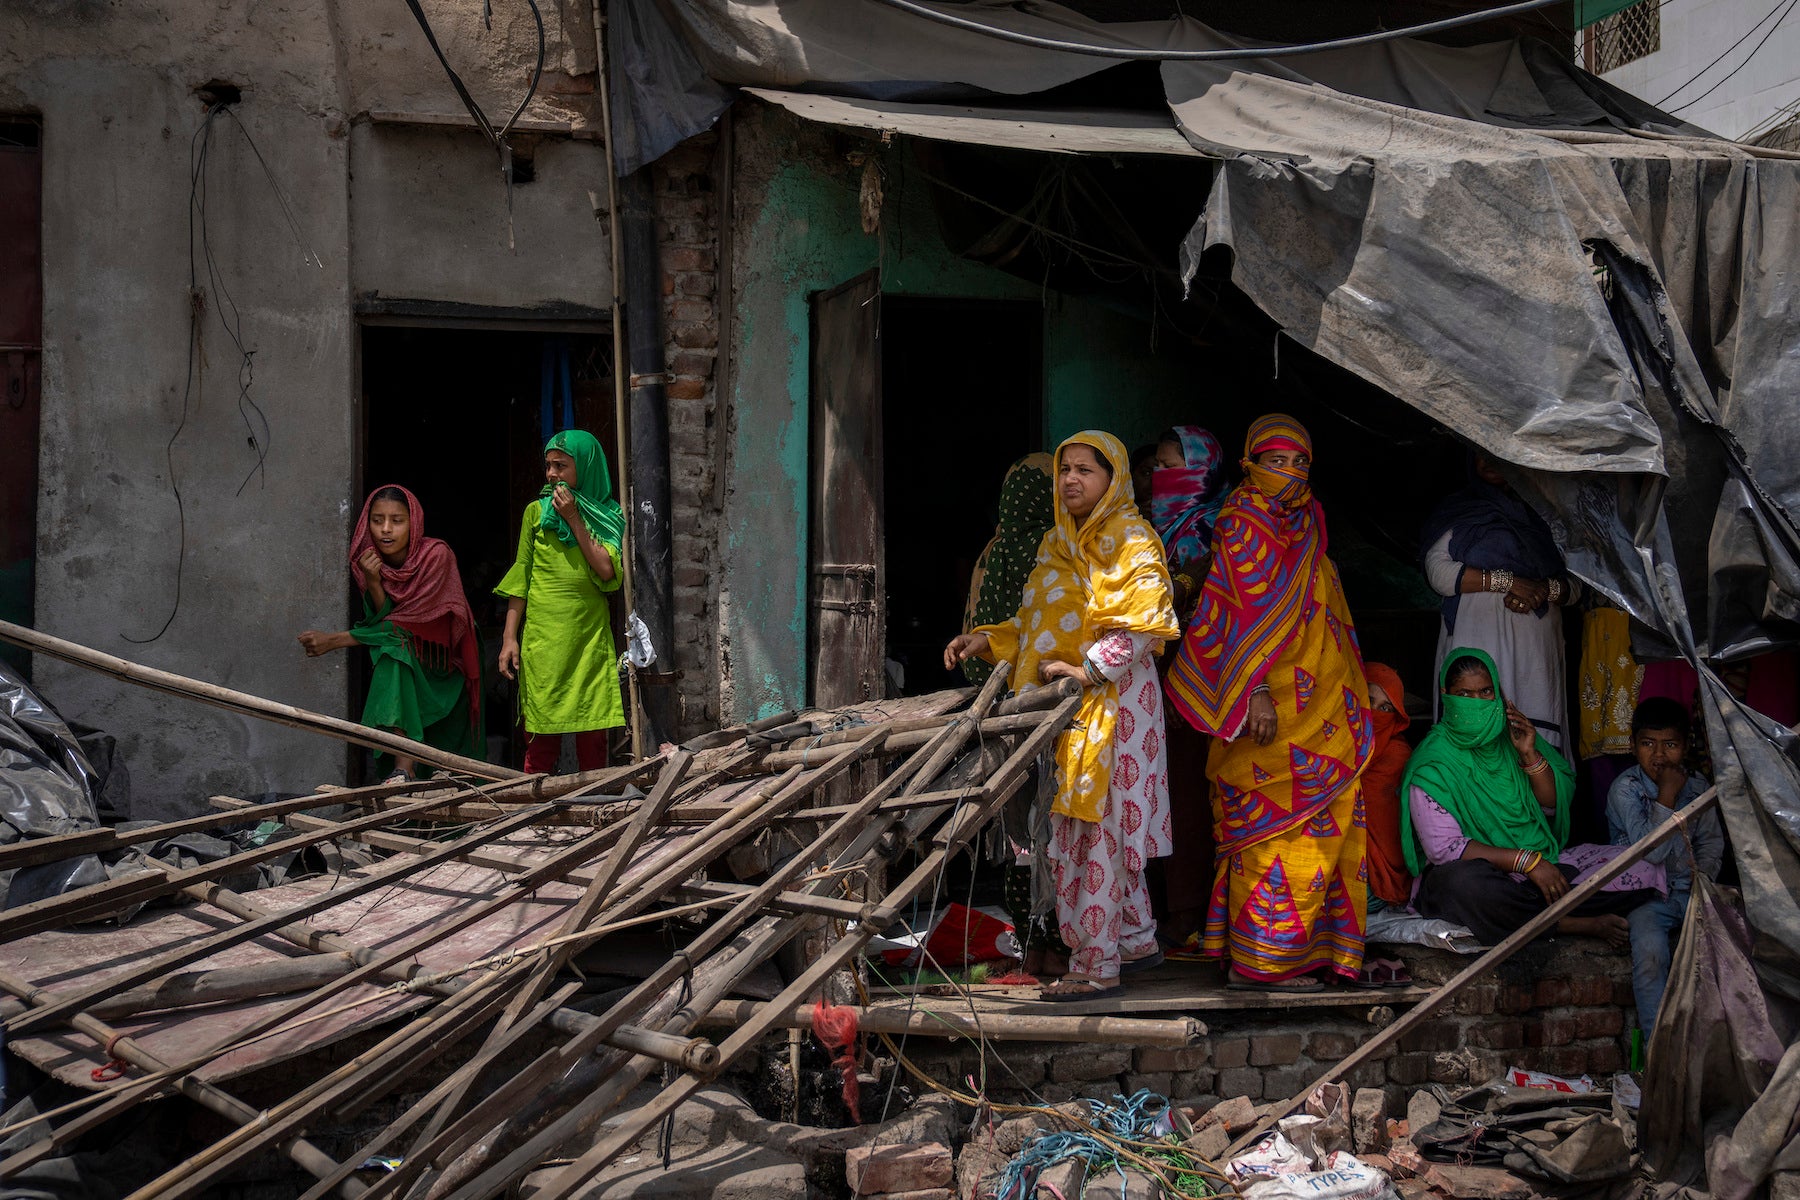 omen stand near the rubble of a shop after authorities demolished a number of Muslim-owned businesses in New Delhi. 